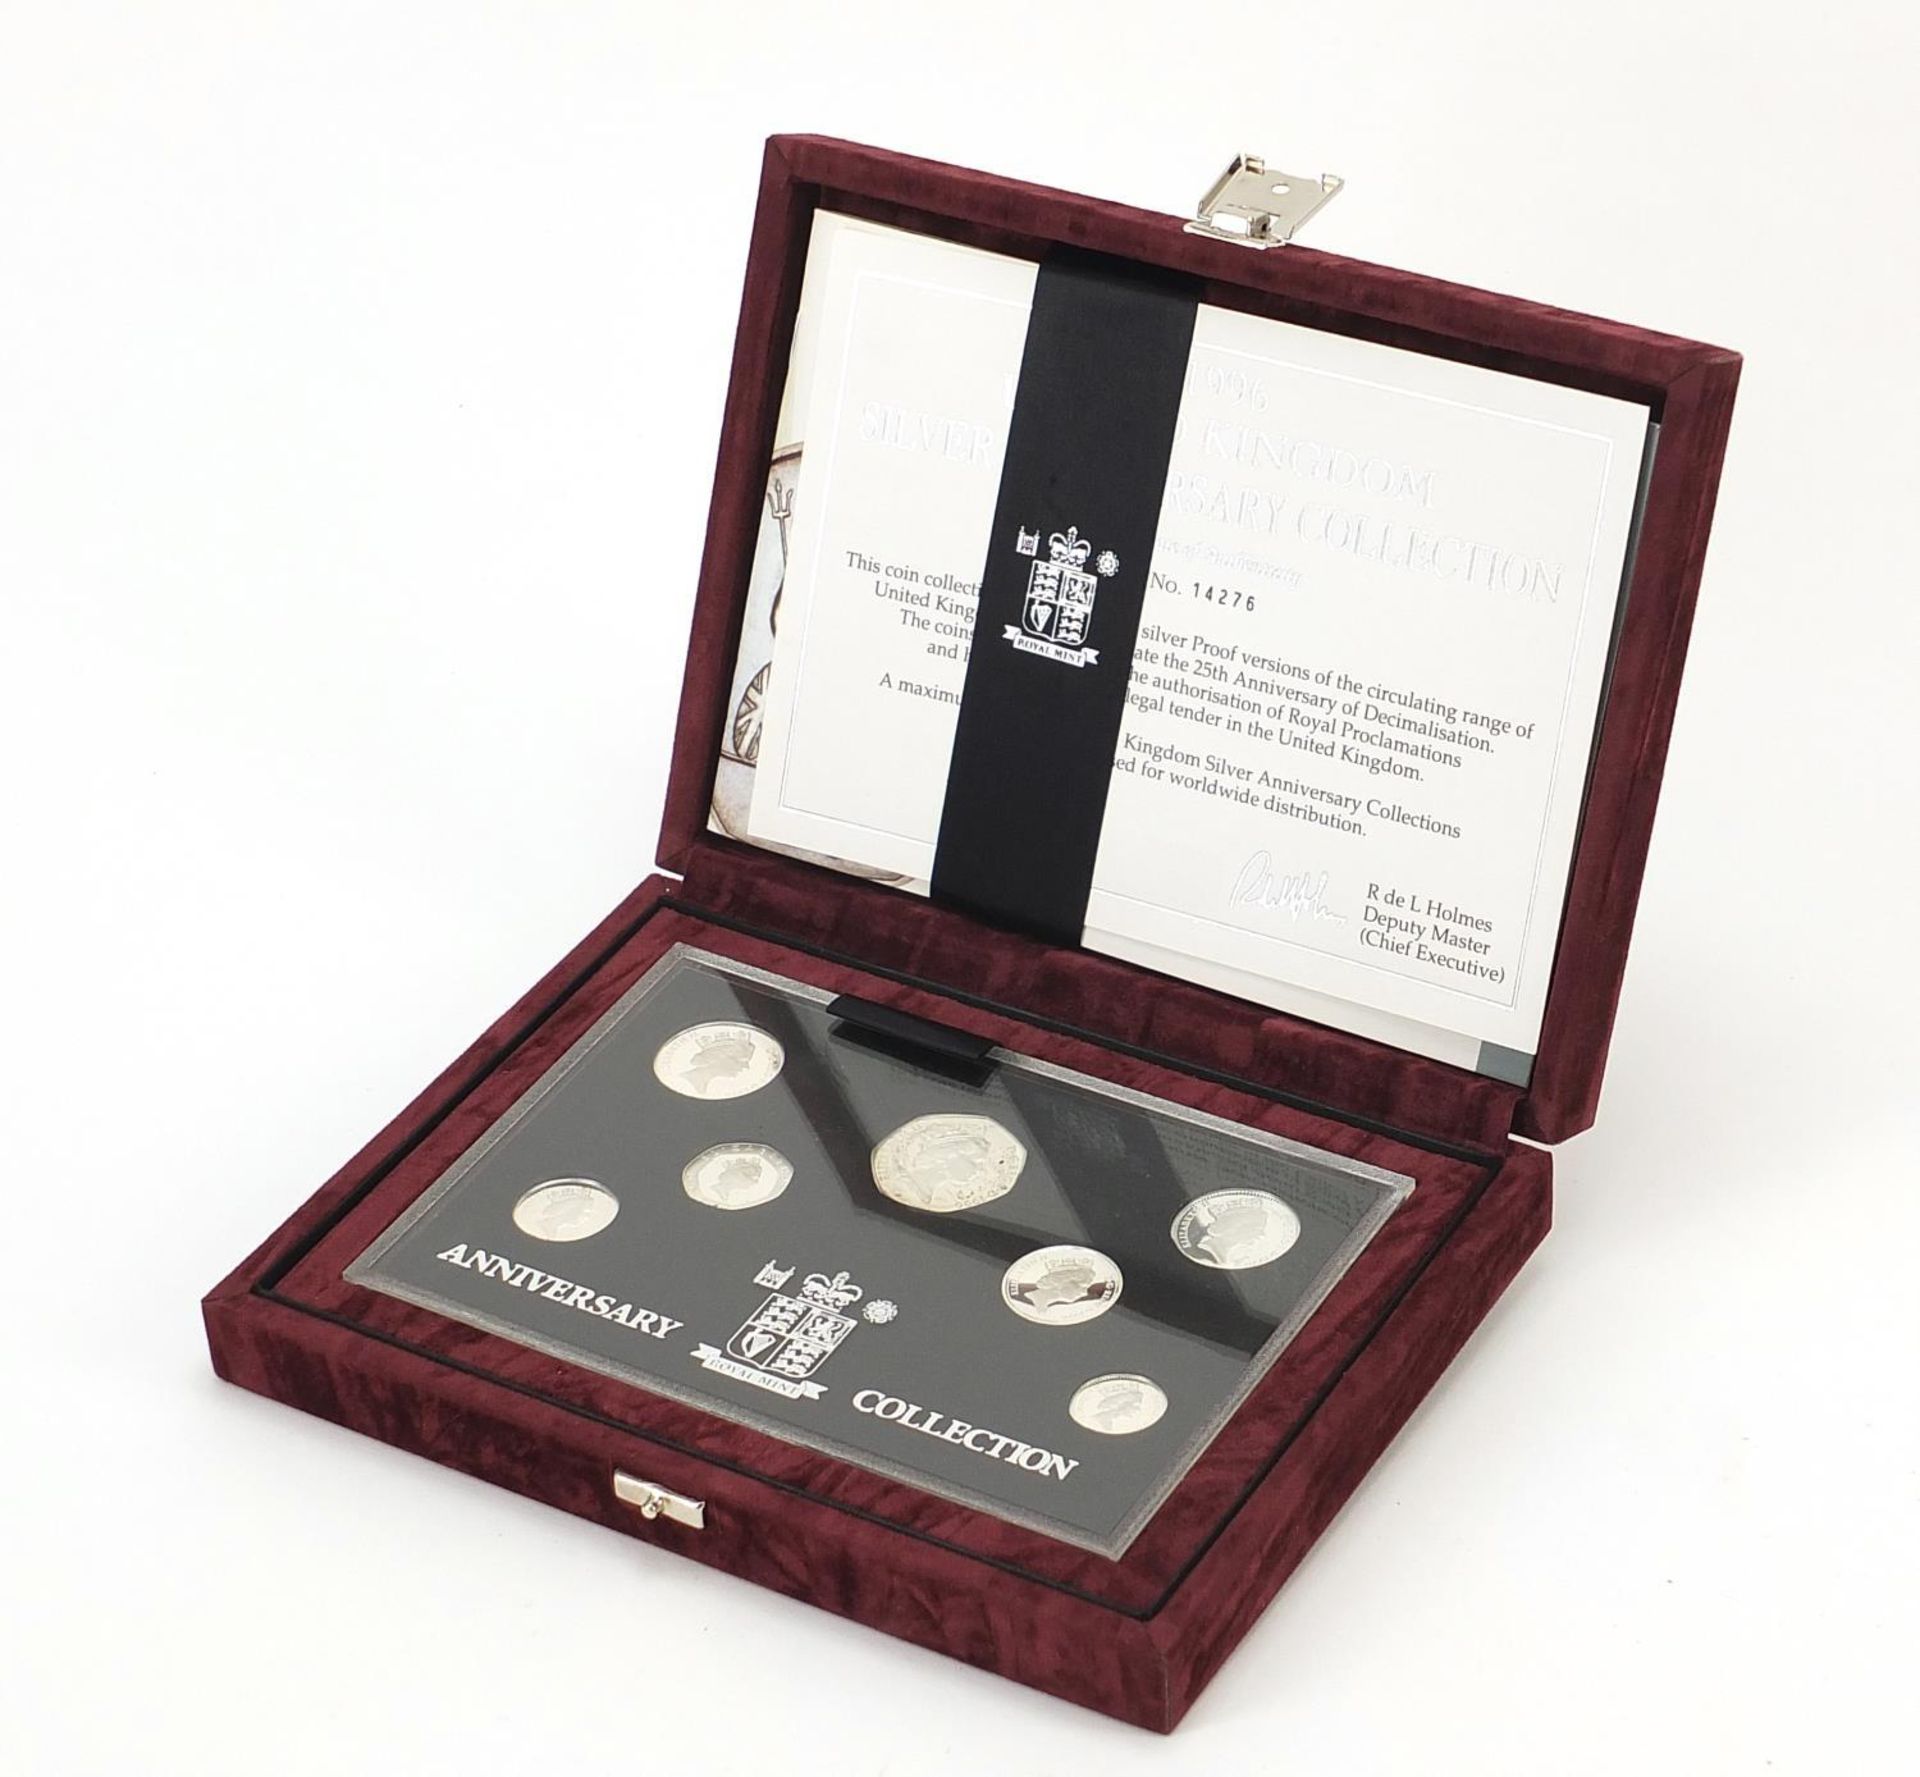 1997 United Kingdom Silver Anniversary Coin Collection with case and certificate number 14276 :